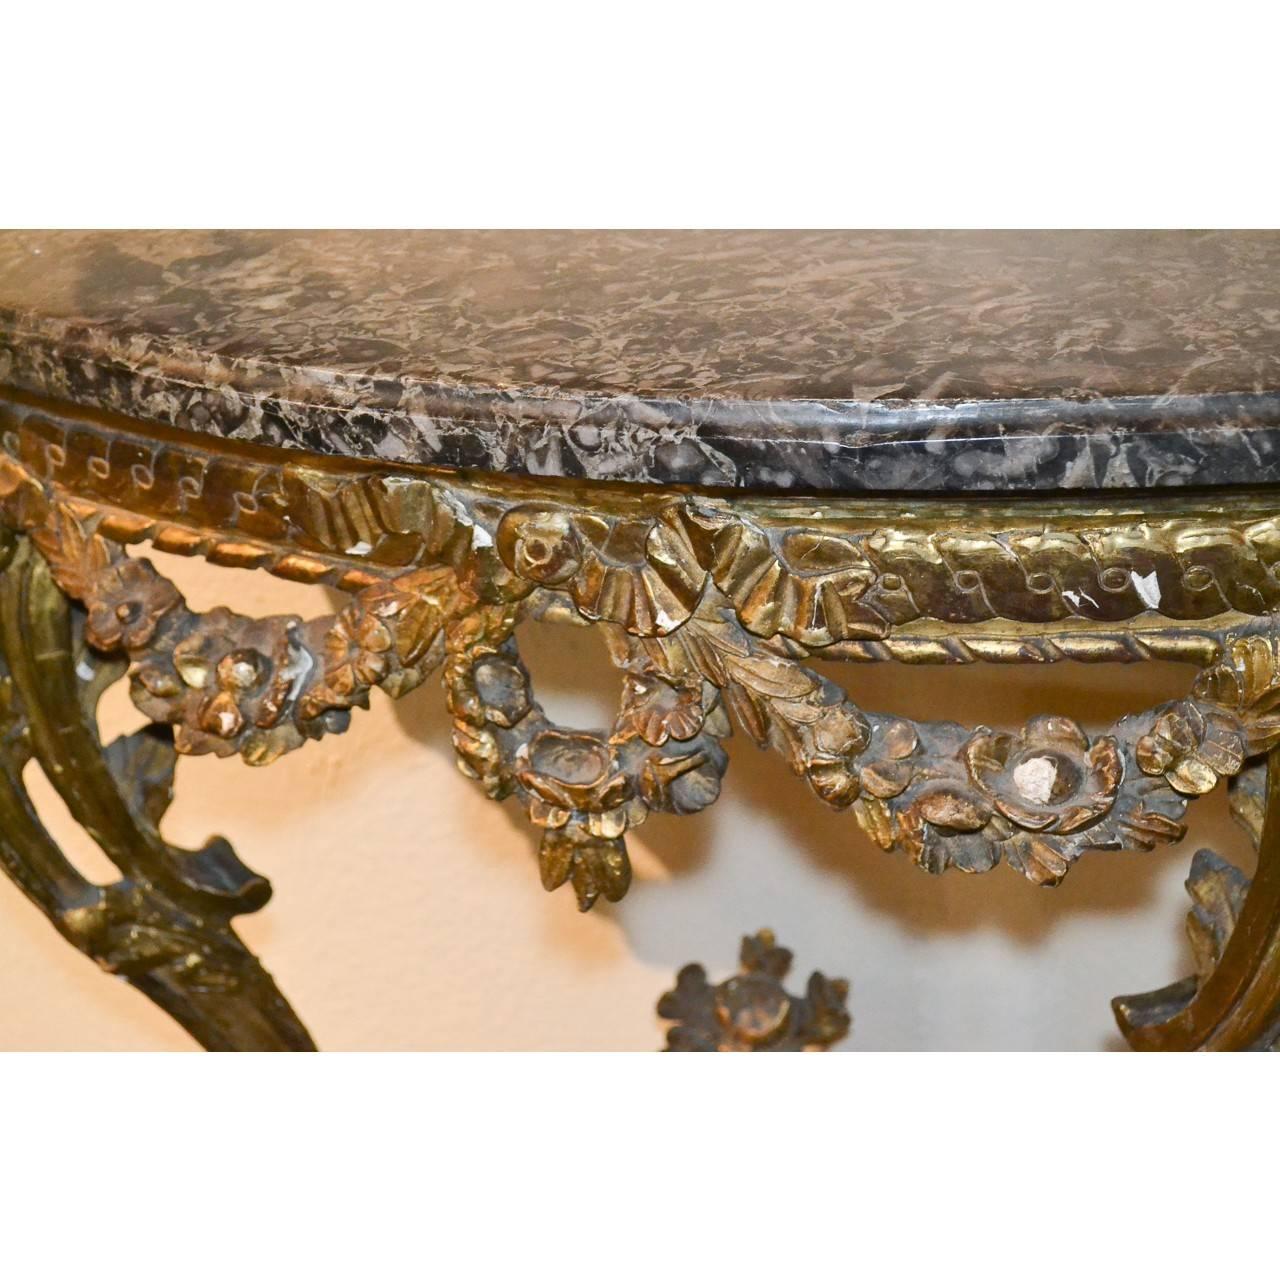 Fabulous 19th century French giltwood console table with an exquisite marble top. (See closeup photo of marble). The base ornately hand-carved with garland swags. The beautifully contoured legs end in carved hoof feet held by a stretcher with an urn